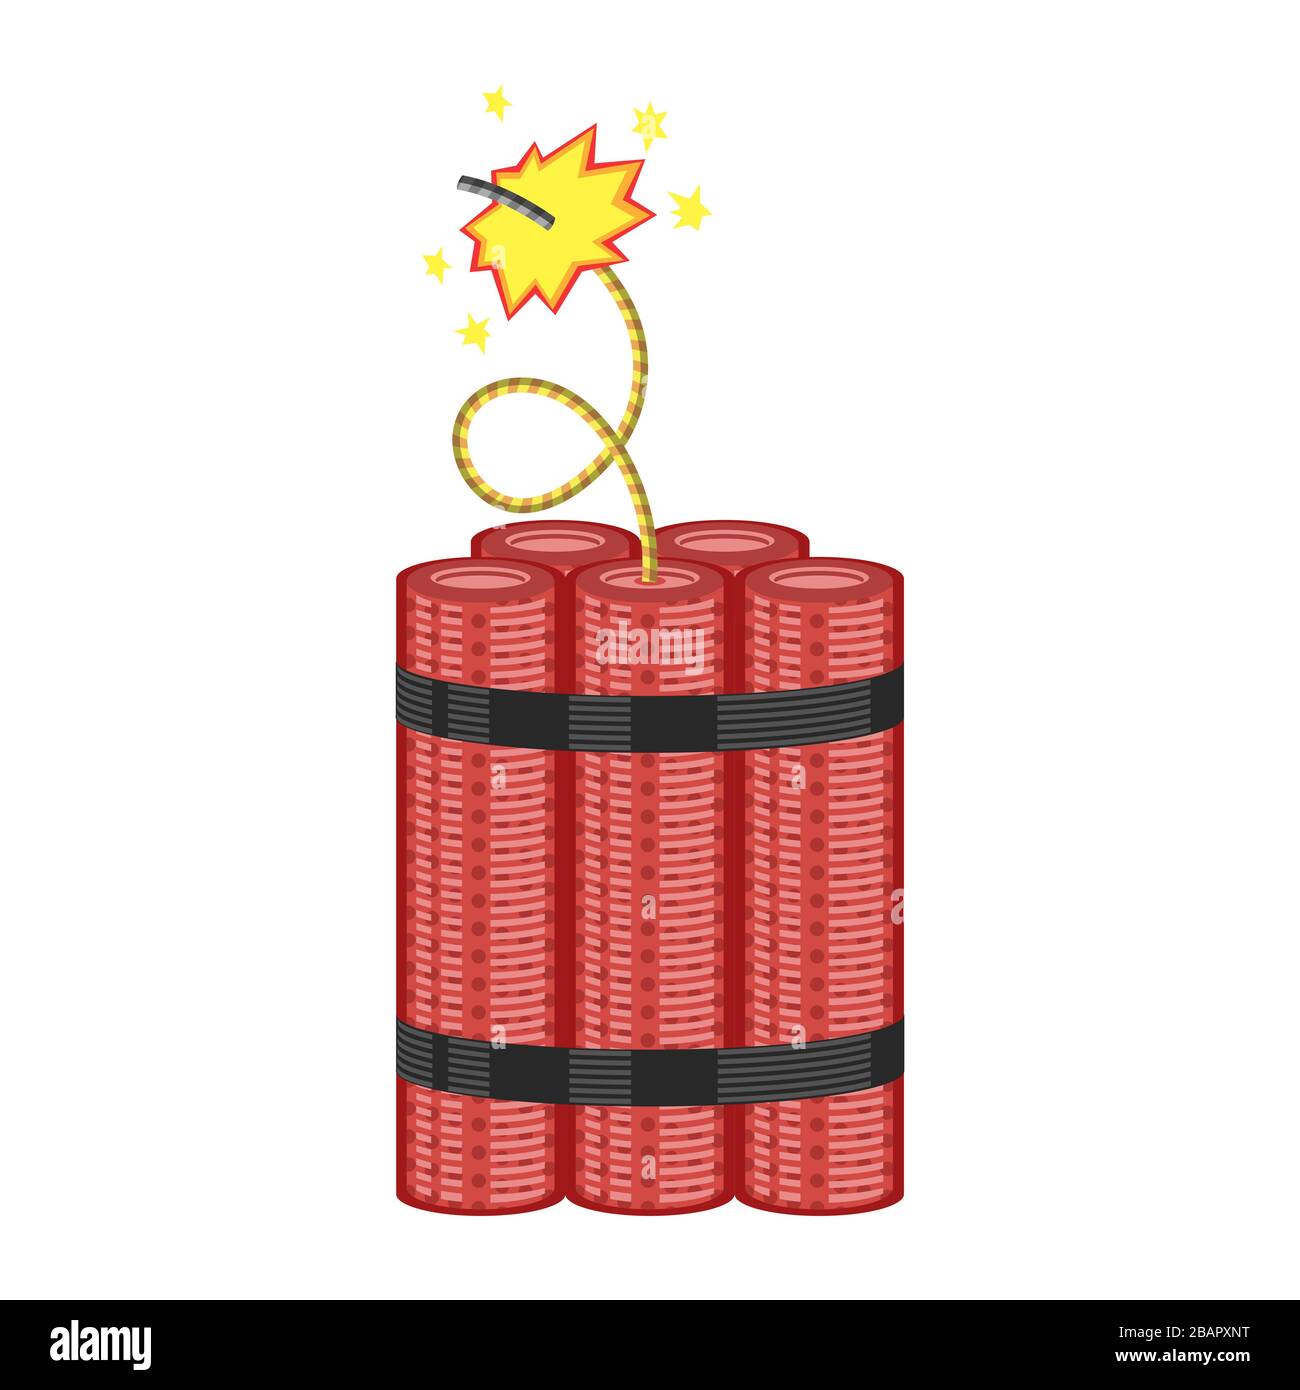 Bomb Icon. Detonate Dynamite Concept. TNT Red Stick. Design Element for Flyer and Poster. Explode Flash, Burn Explosion. Stock Vector